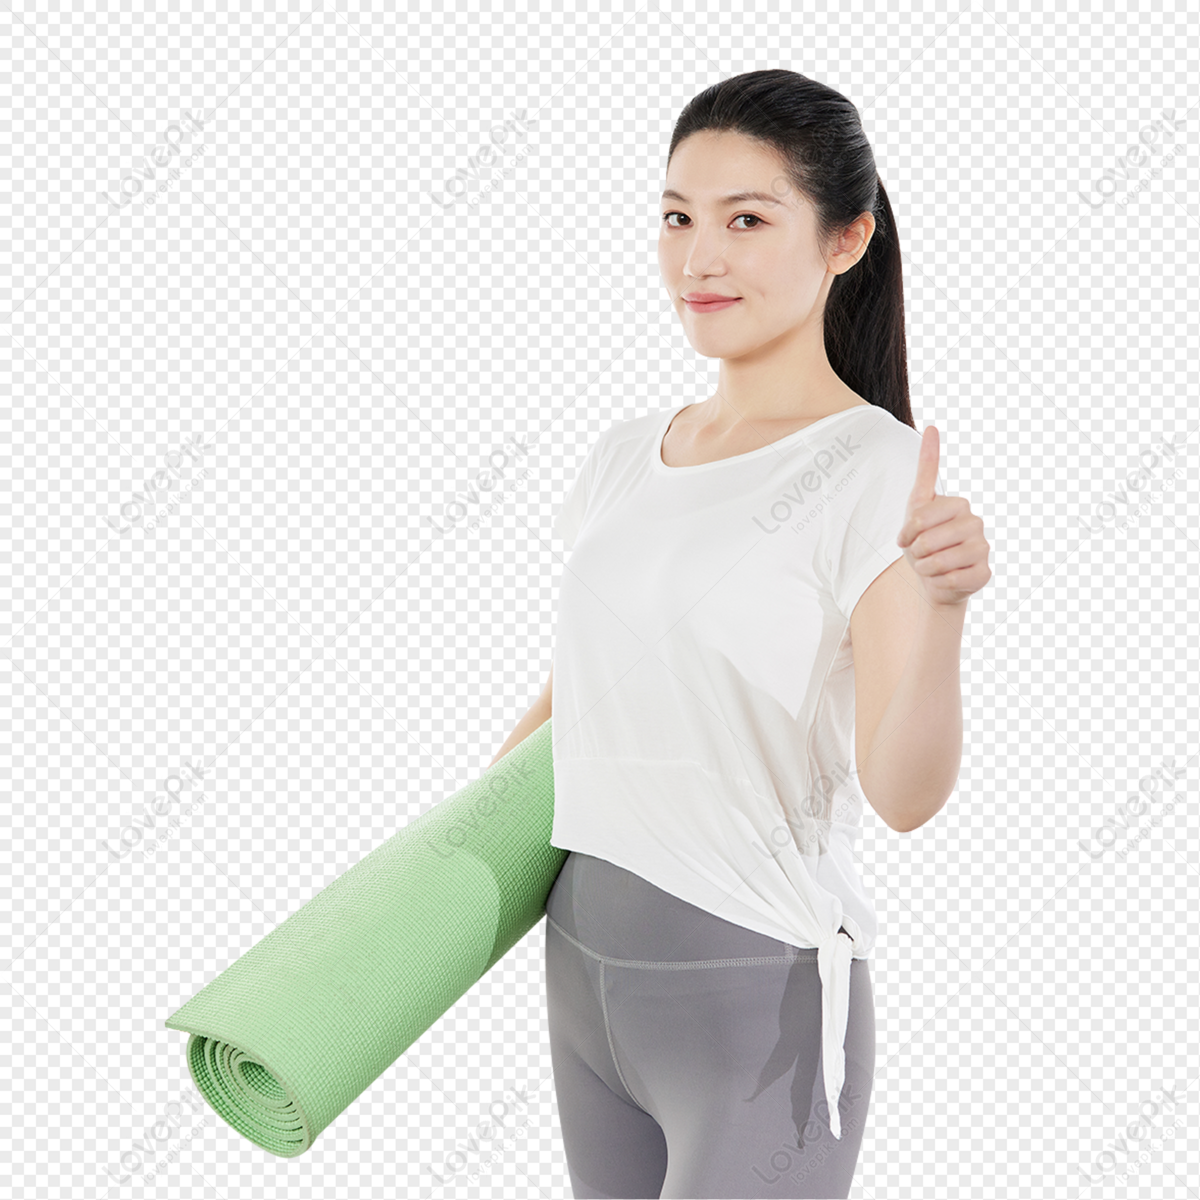 Female Holding Yoga Mat Image Show, Material, Plastic, Slim PNG Hd  Transparent Image And Clipart Image For Free Download - Lovepik